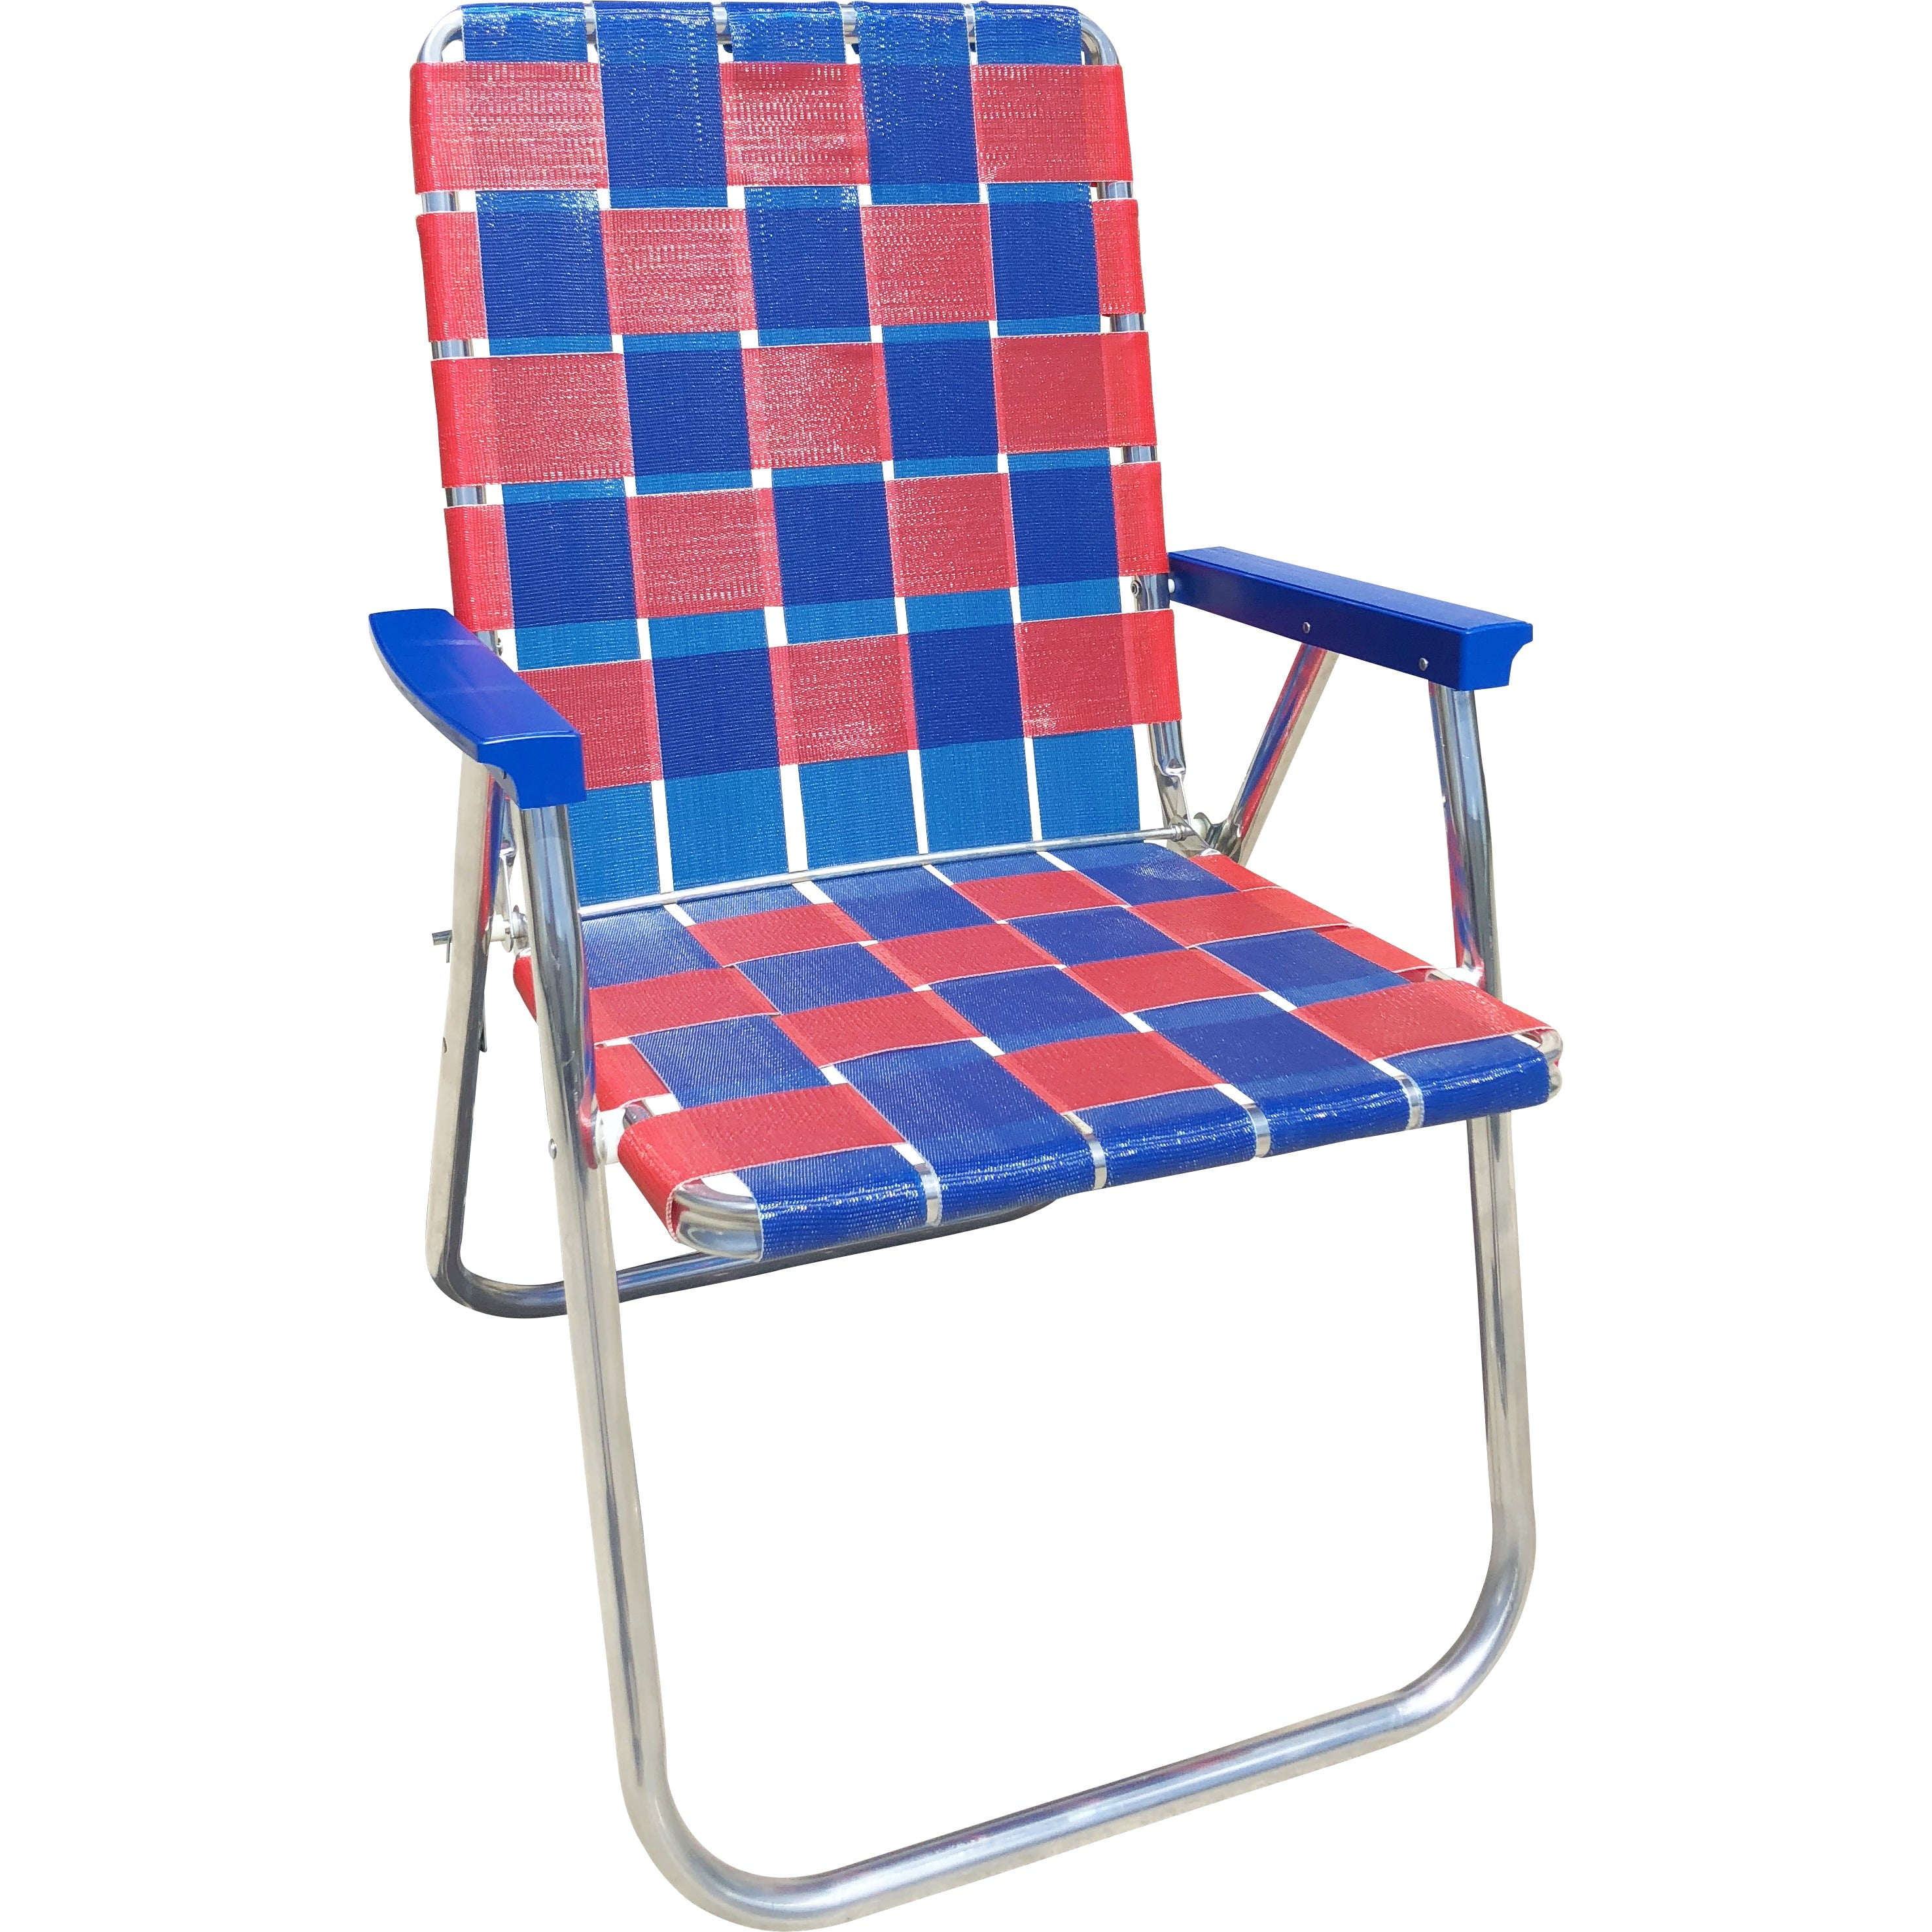 Accessories Made from Lawn Chair Webbing • Recyclart